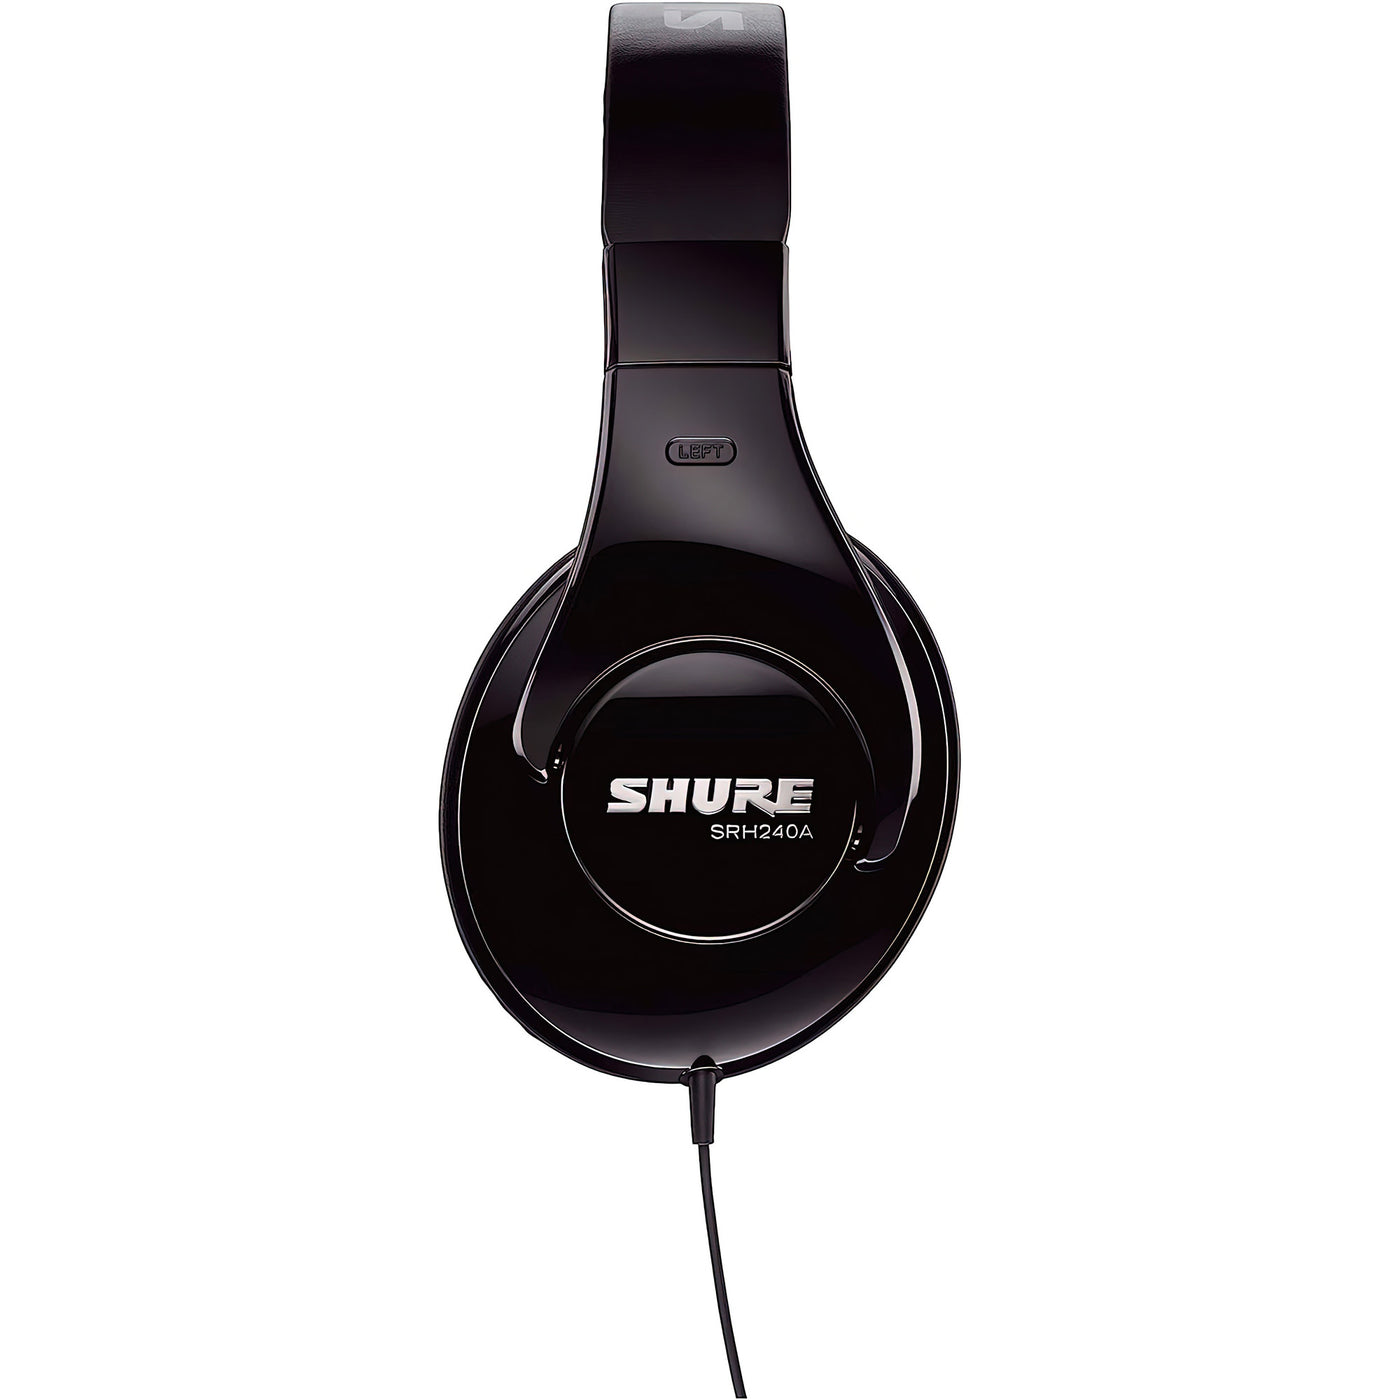 Shure Professional Quality Headphones for Home Recording & Everyday Listening, 40mm Neodymium Dynamic Drivers for Full Bass and Detailed Highs, Threaded 1/4" (6.3 mm) Nickel-Plated Adapter (SRH240A-BK)